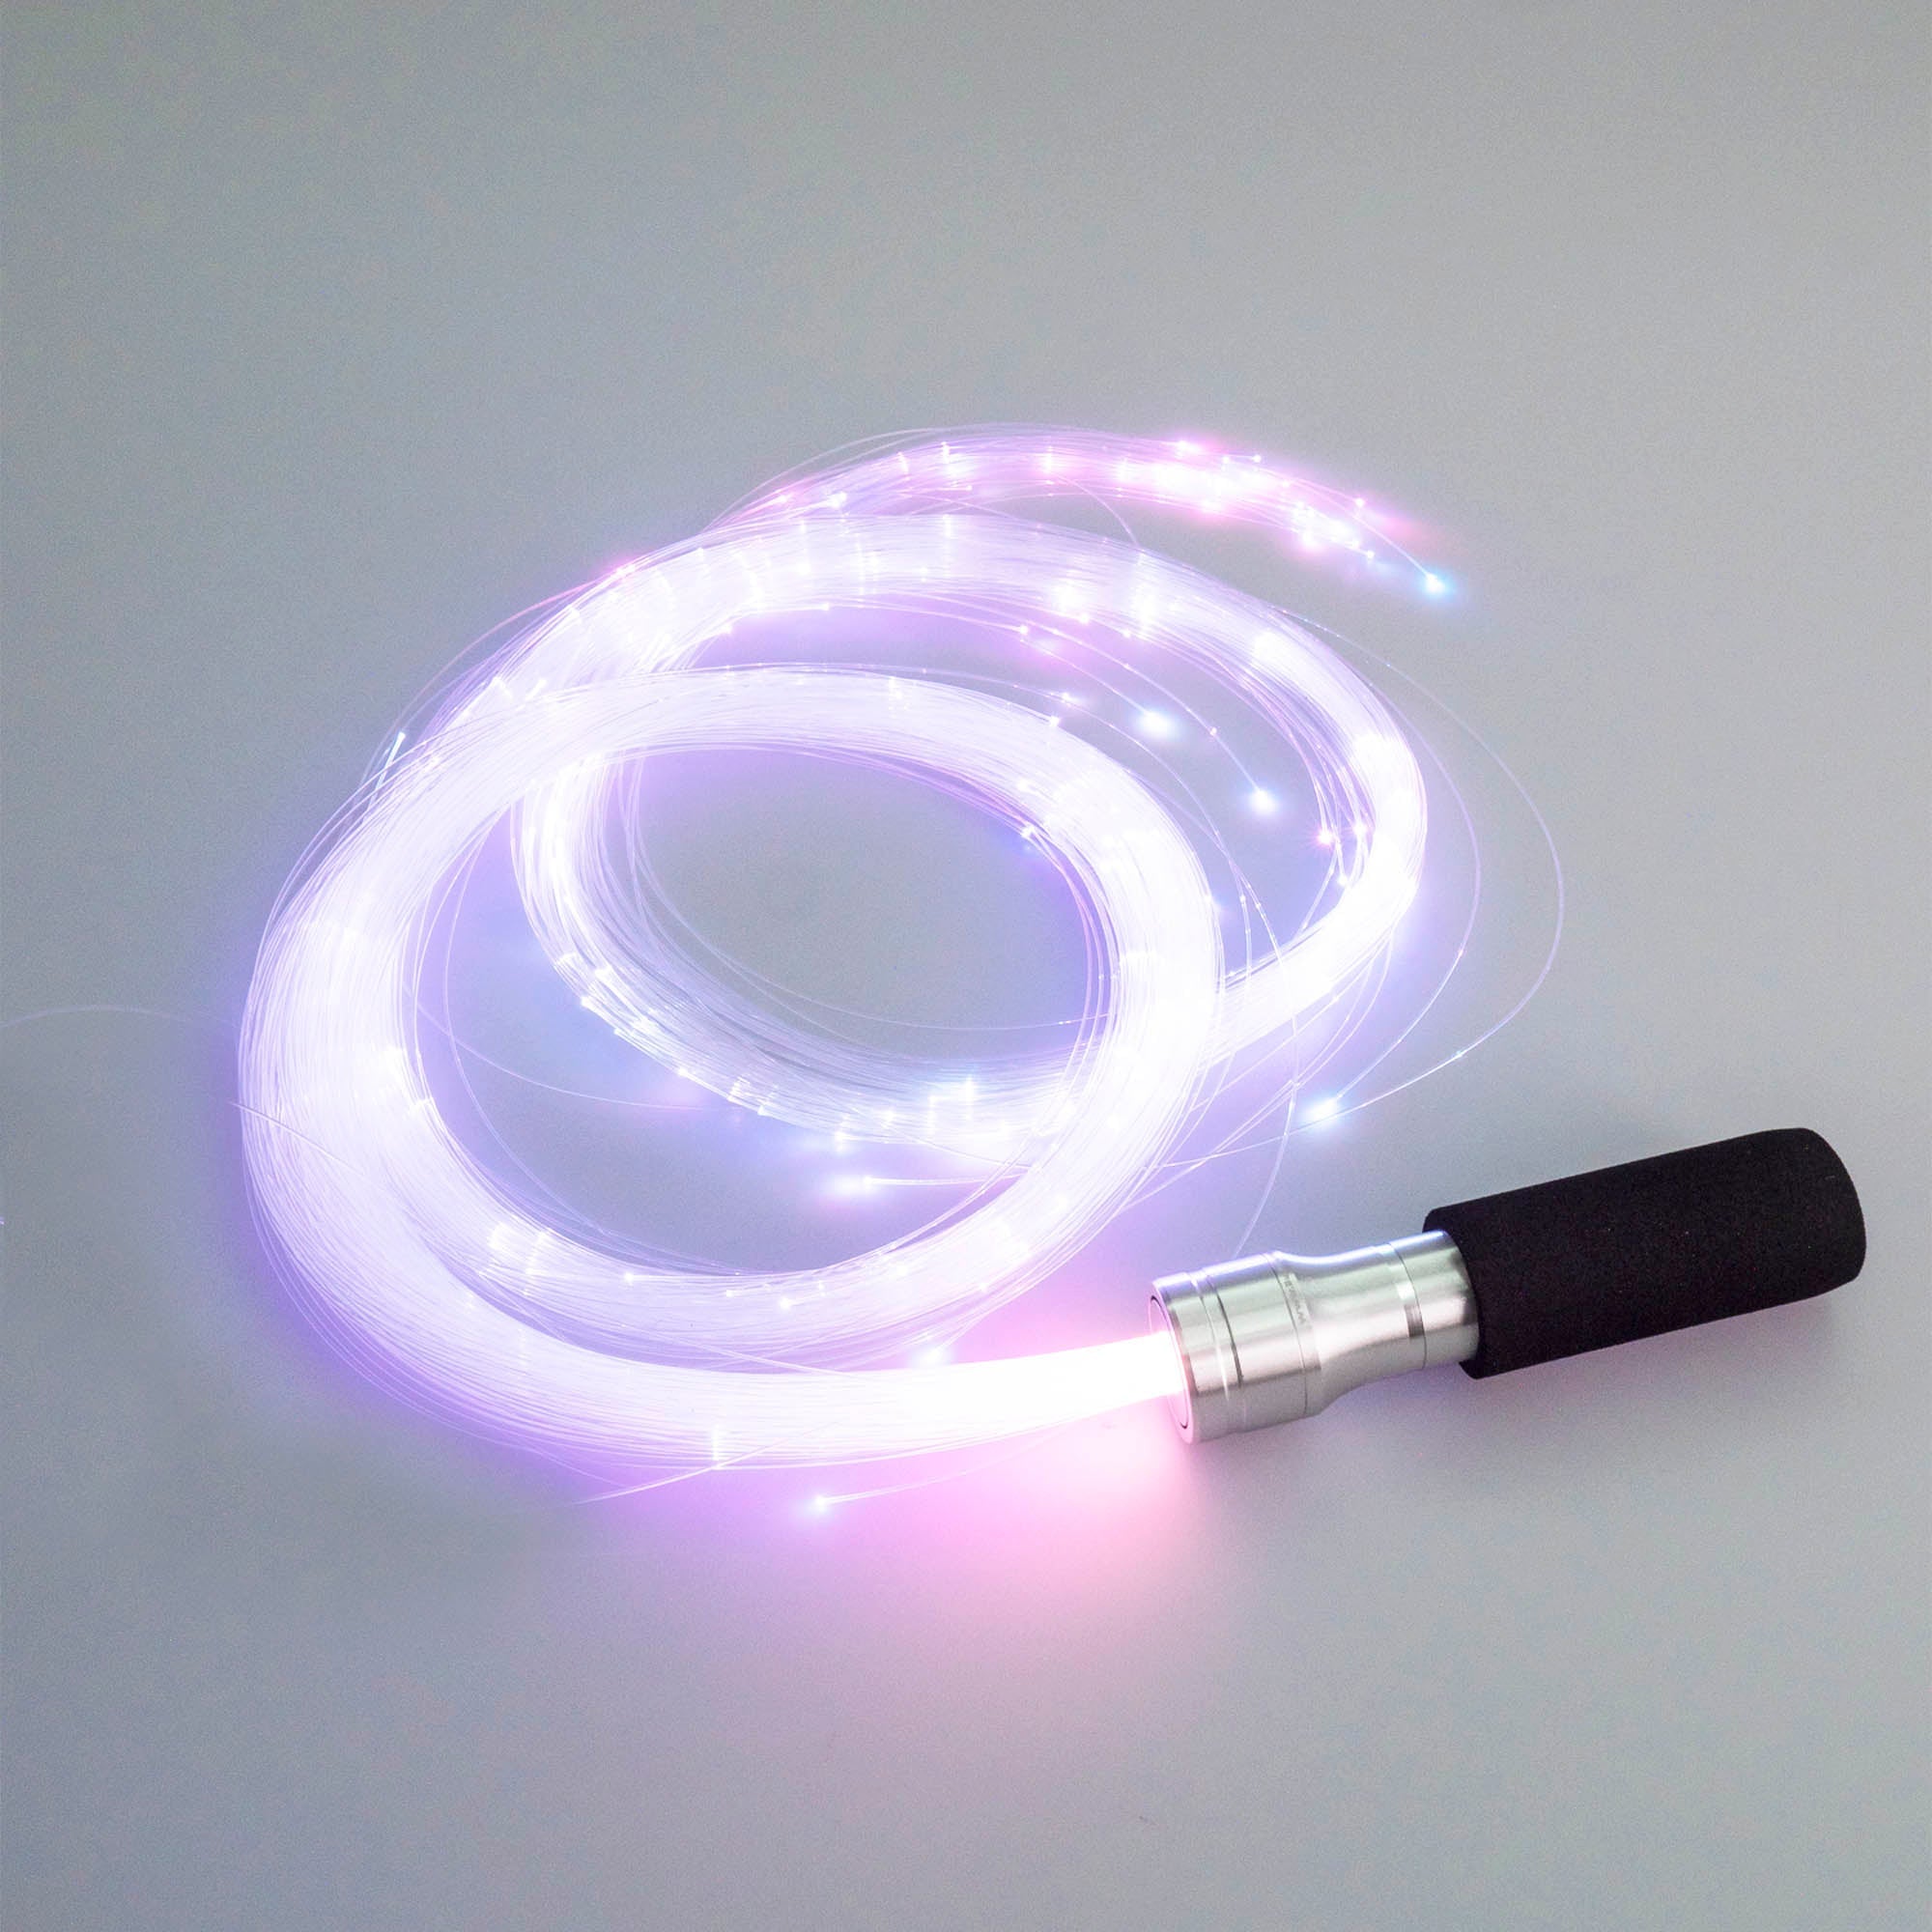 mega pixelwhip glowing on a table